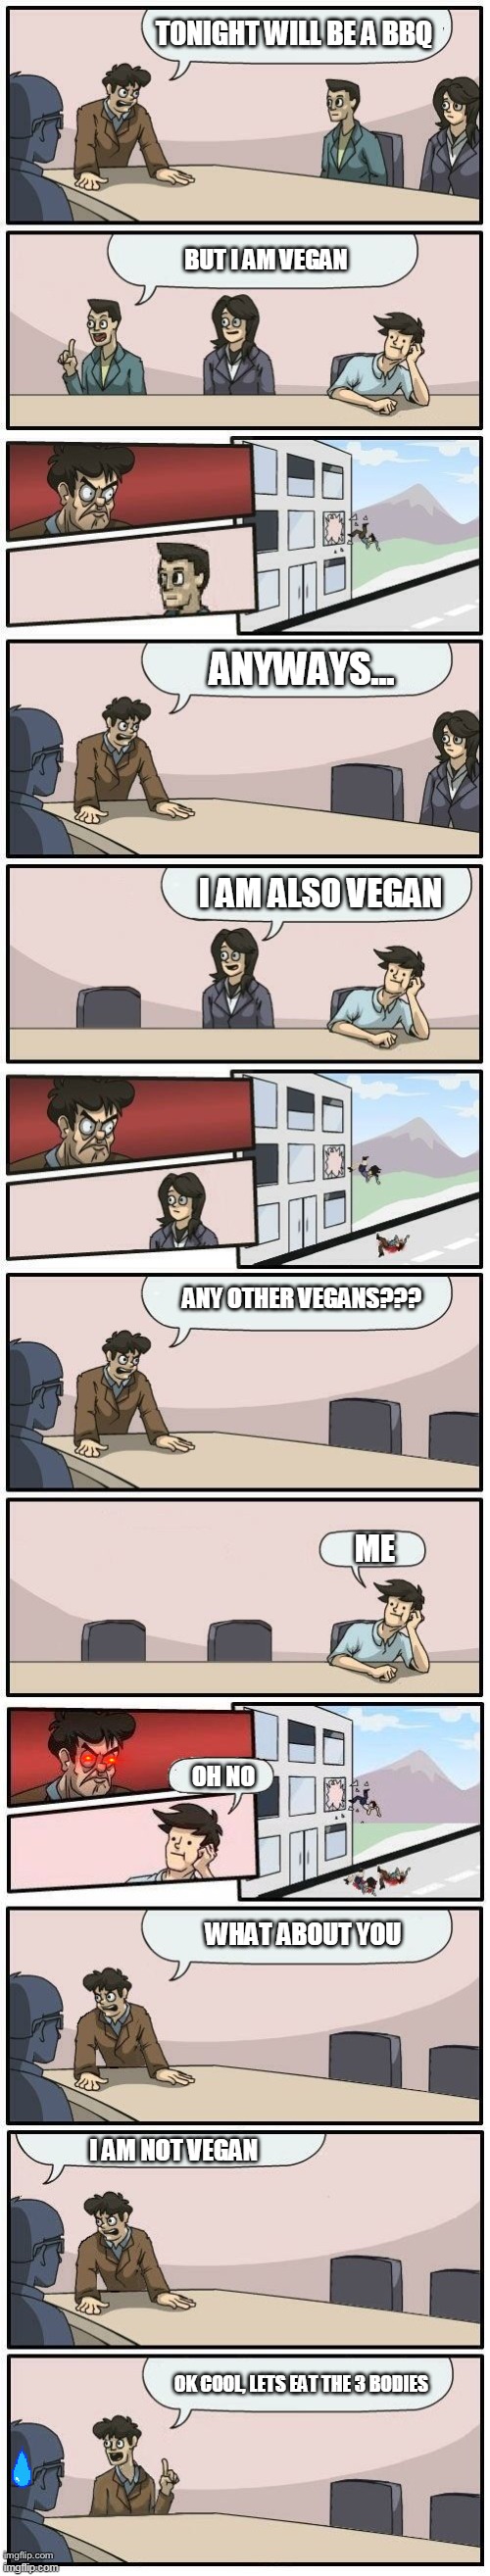 Boardroom Meeting Suggestions Extended | TONIGHT WILL BE A BBQ; BUT I AM VEGAN; ANYWAYS... I AM ALSO VEGAN; ANY OTHER VEGANS??? ME; OH NO; WHAT ABOUT YOU; I AM NOT VEGAN; OK COOL, LETS EAT THE 3 BODIES | image tagged in boardroom meeting suggestions extended,mlg,world of warships - potato thoughts | made w/ Imgflip meme maker